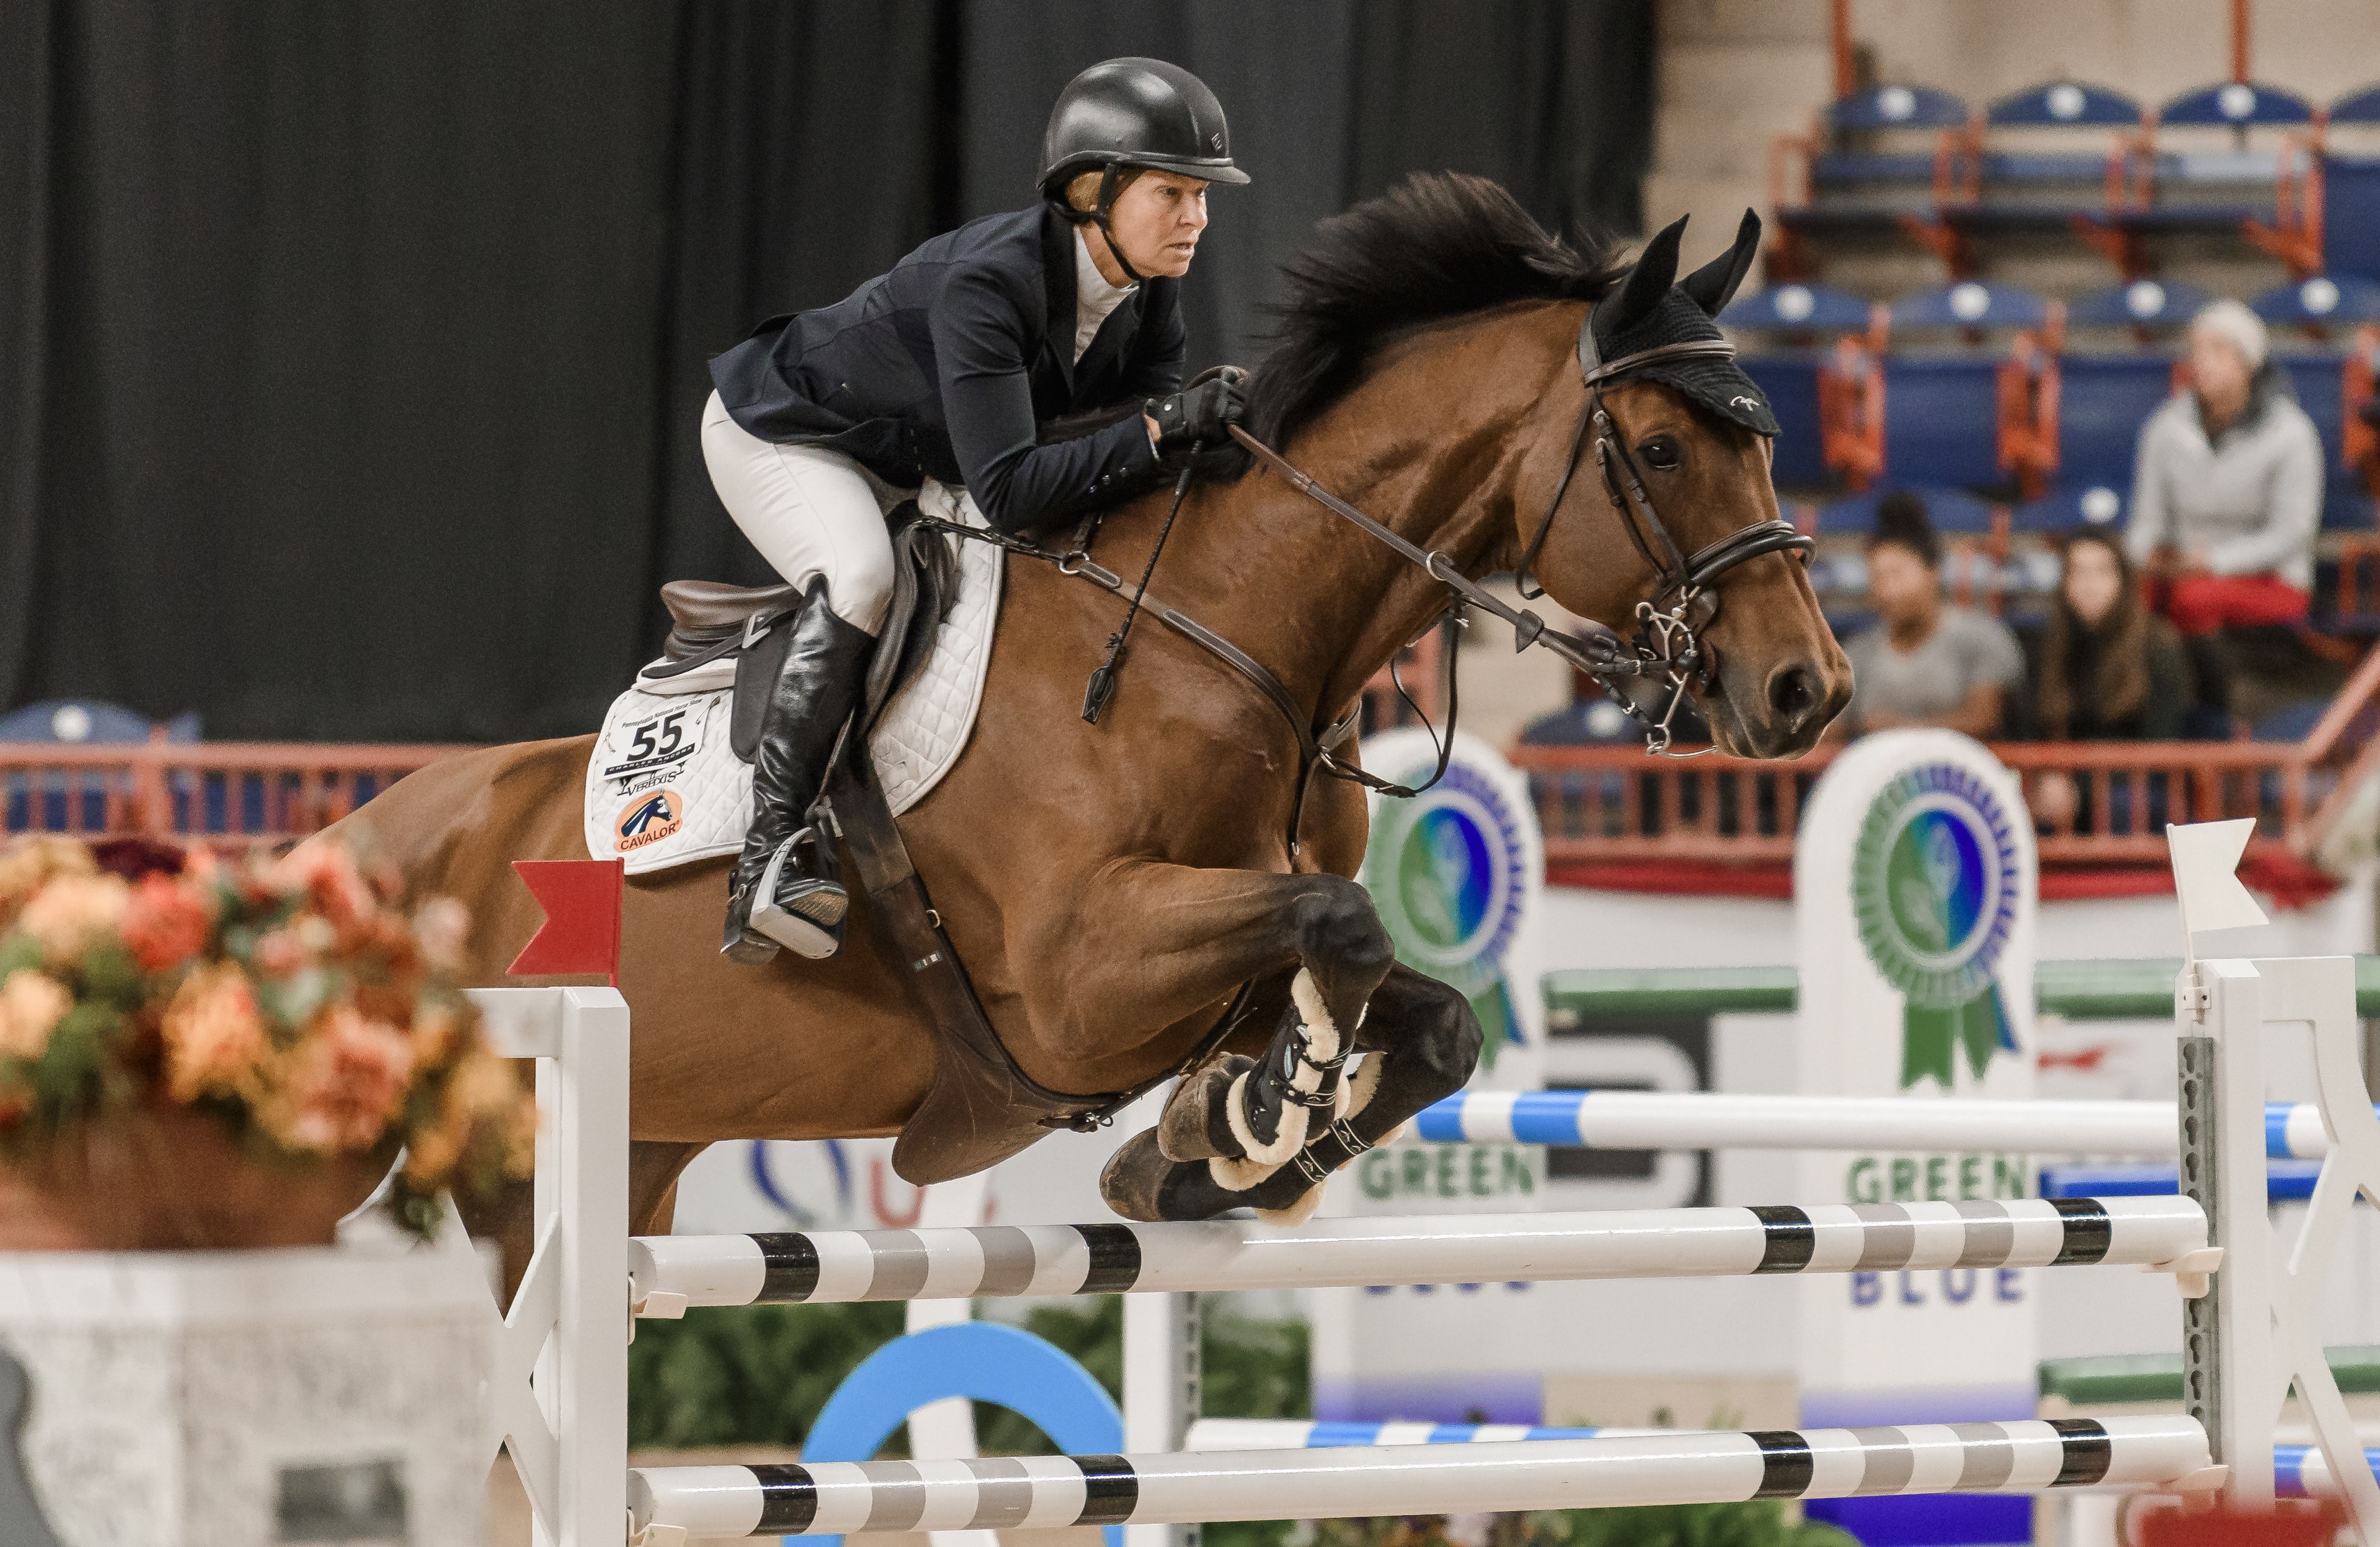 Horse and Country To Stream Exclusive Live and On-Demand Coverage of the 2021 Pennsylvania National Horse Show on HandC+